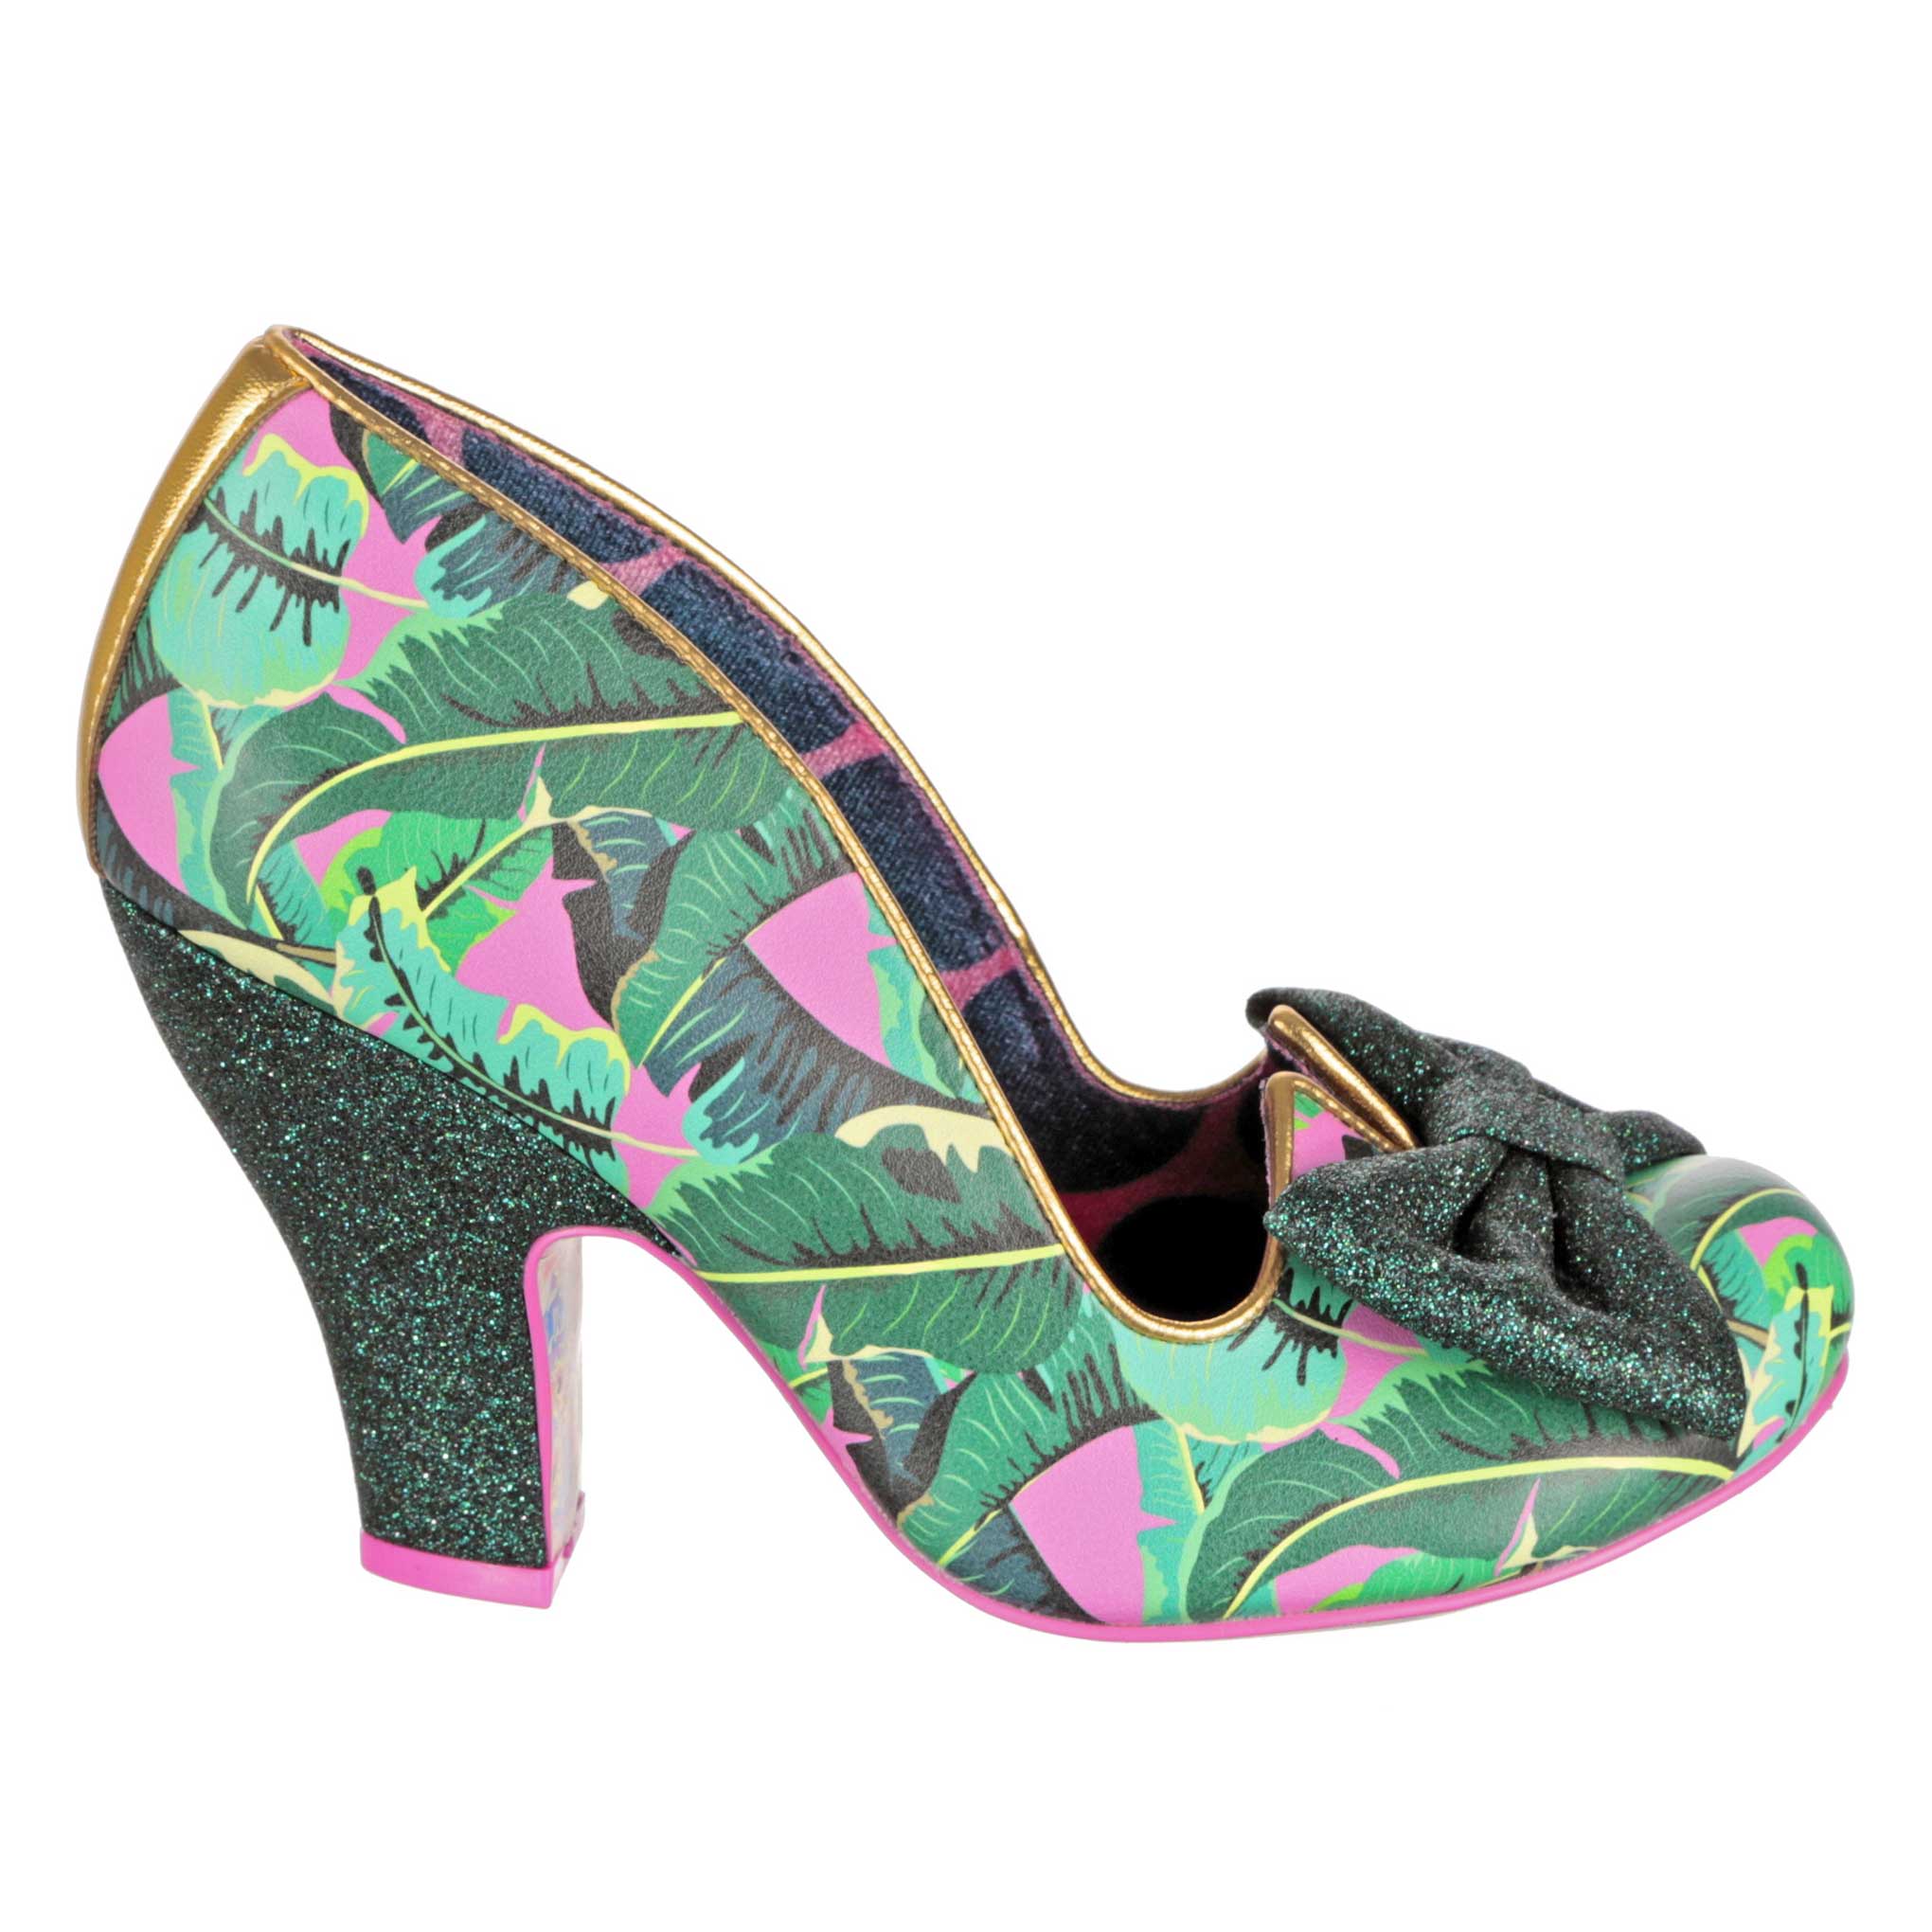 Irregular Choice Play Date Pink/Green – Lilac & Lime St Ives